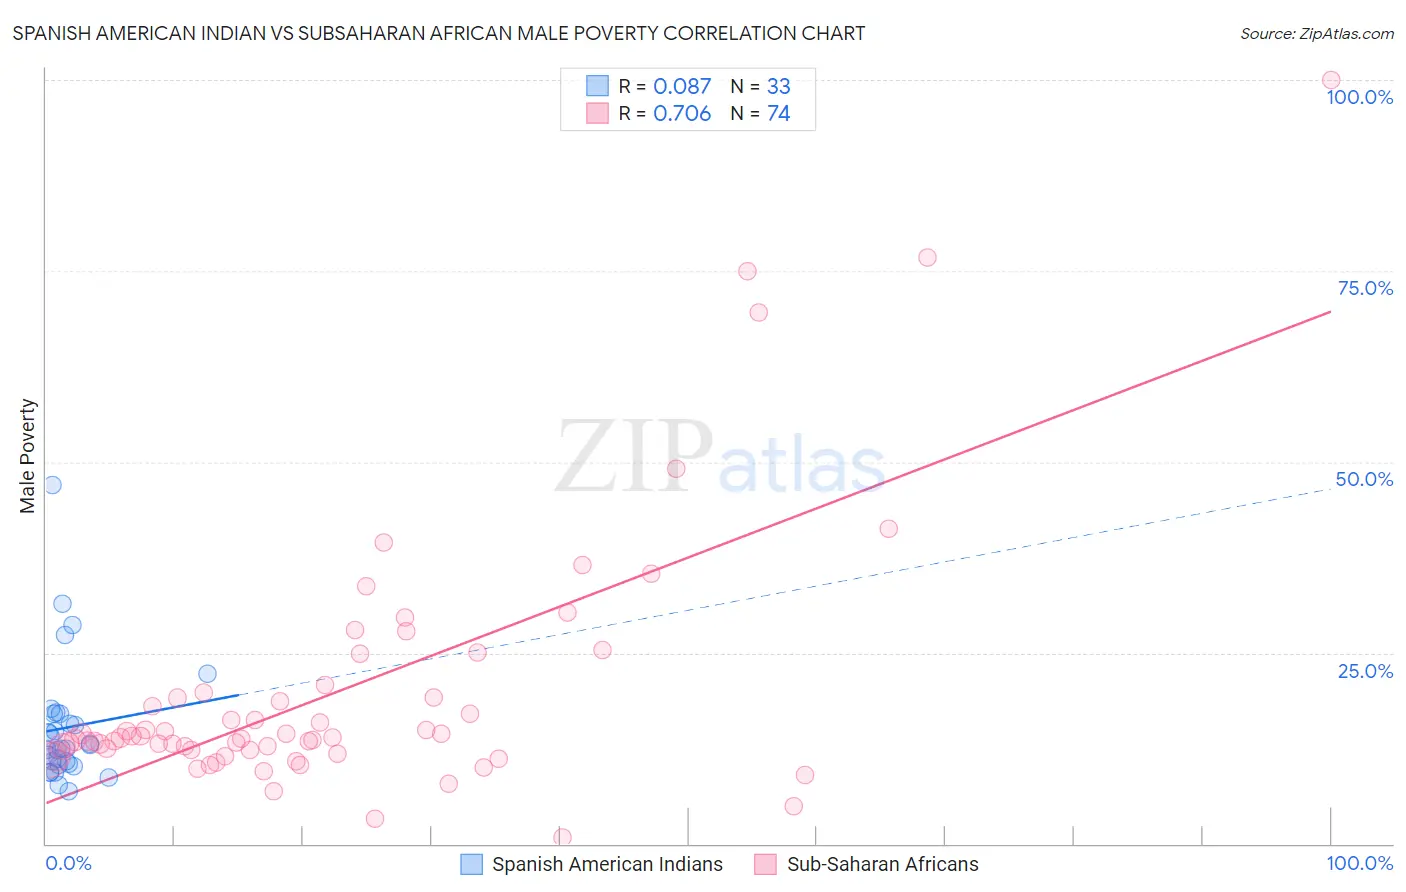 Spanish American Indian vs Subsaharan African Male Poverty